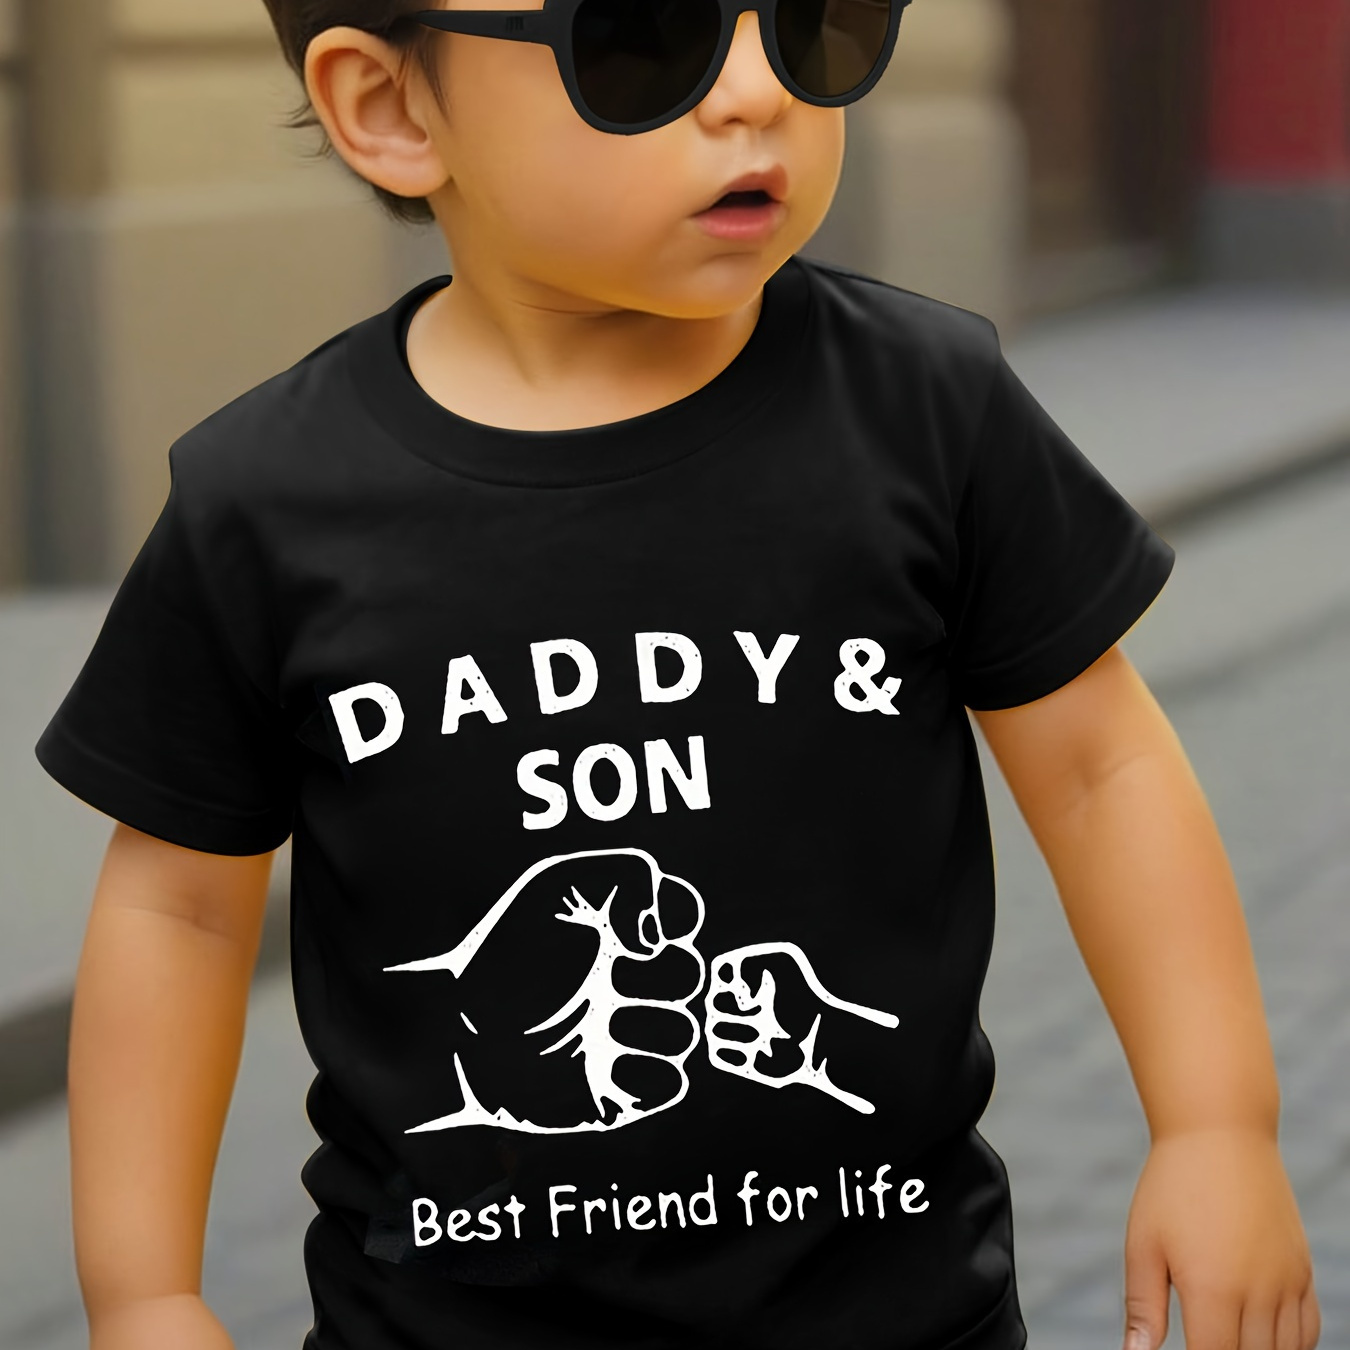 

Daddy & Son Print Boy's Casual T-shirt, Short Sleeve Comfy Tee Tops, Summer Outdoor Sports Clothing